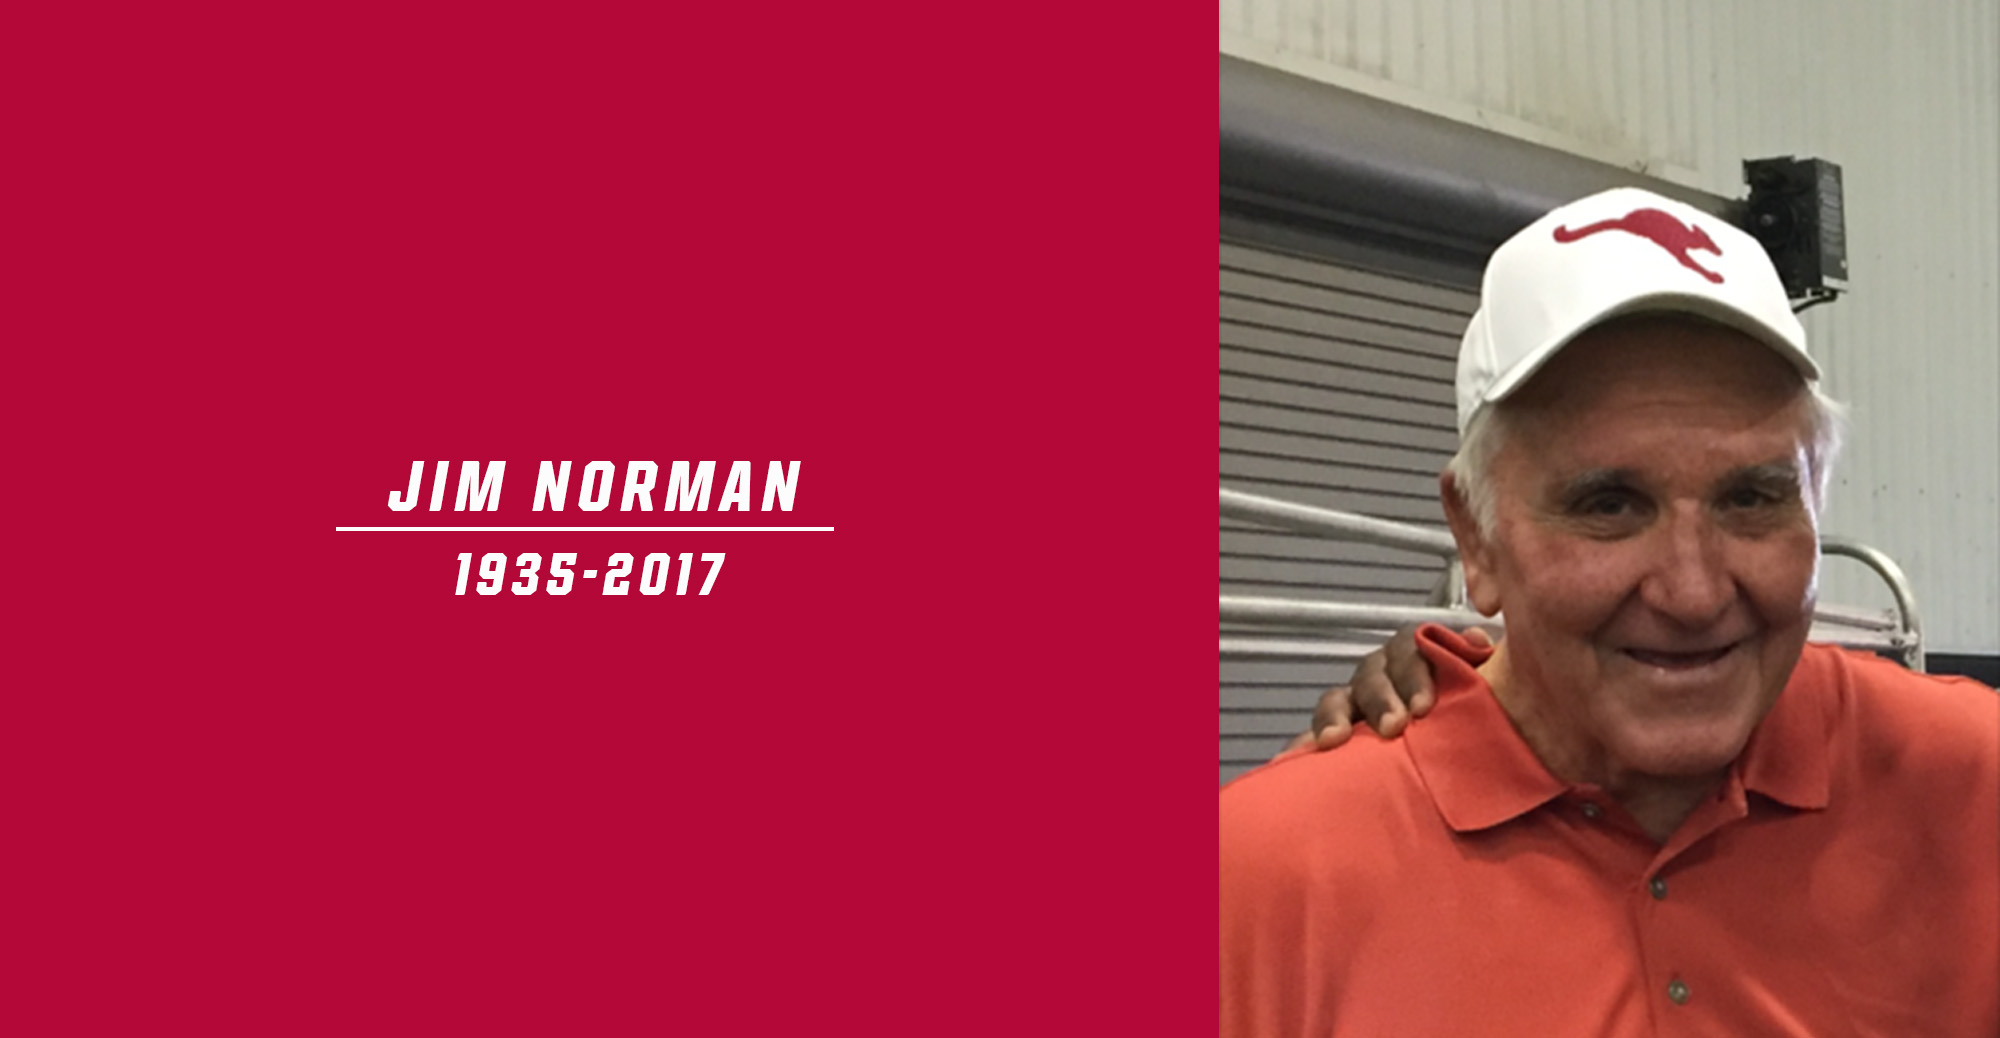 Austin College Mourns the Loss of Jim Norman